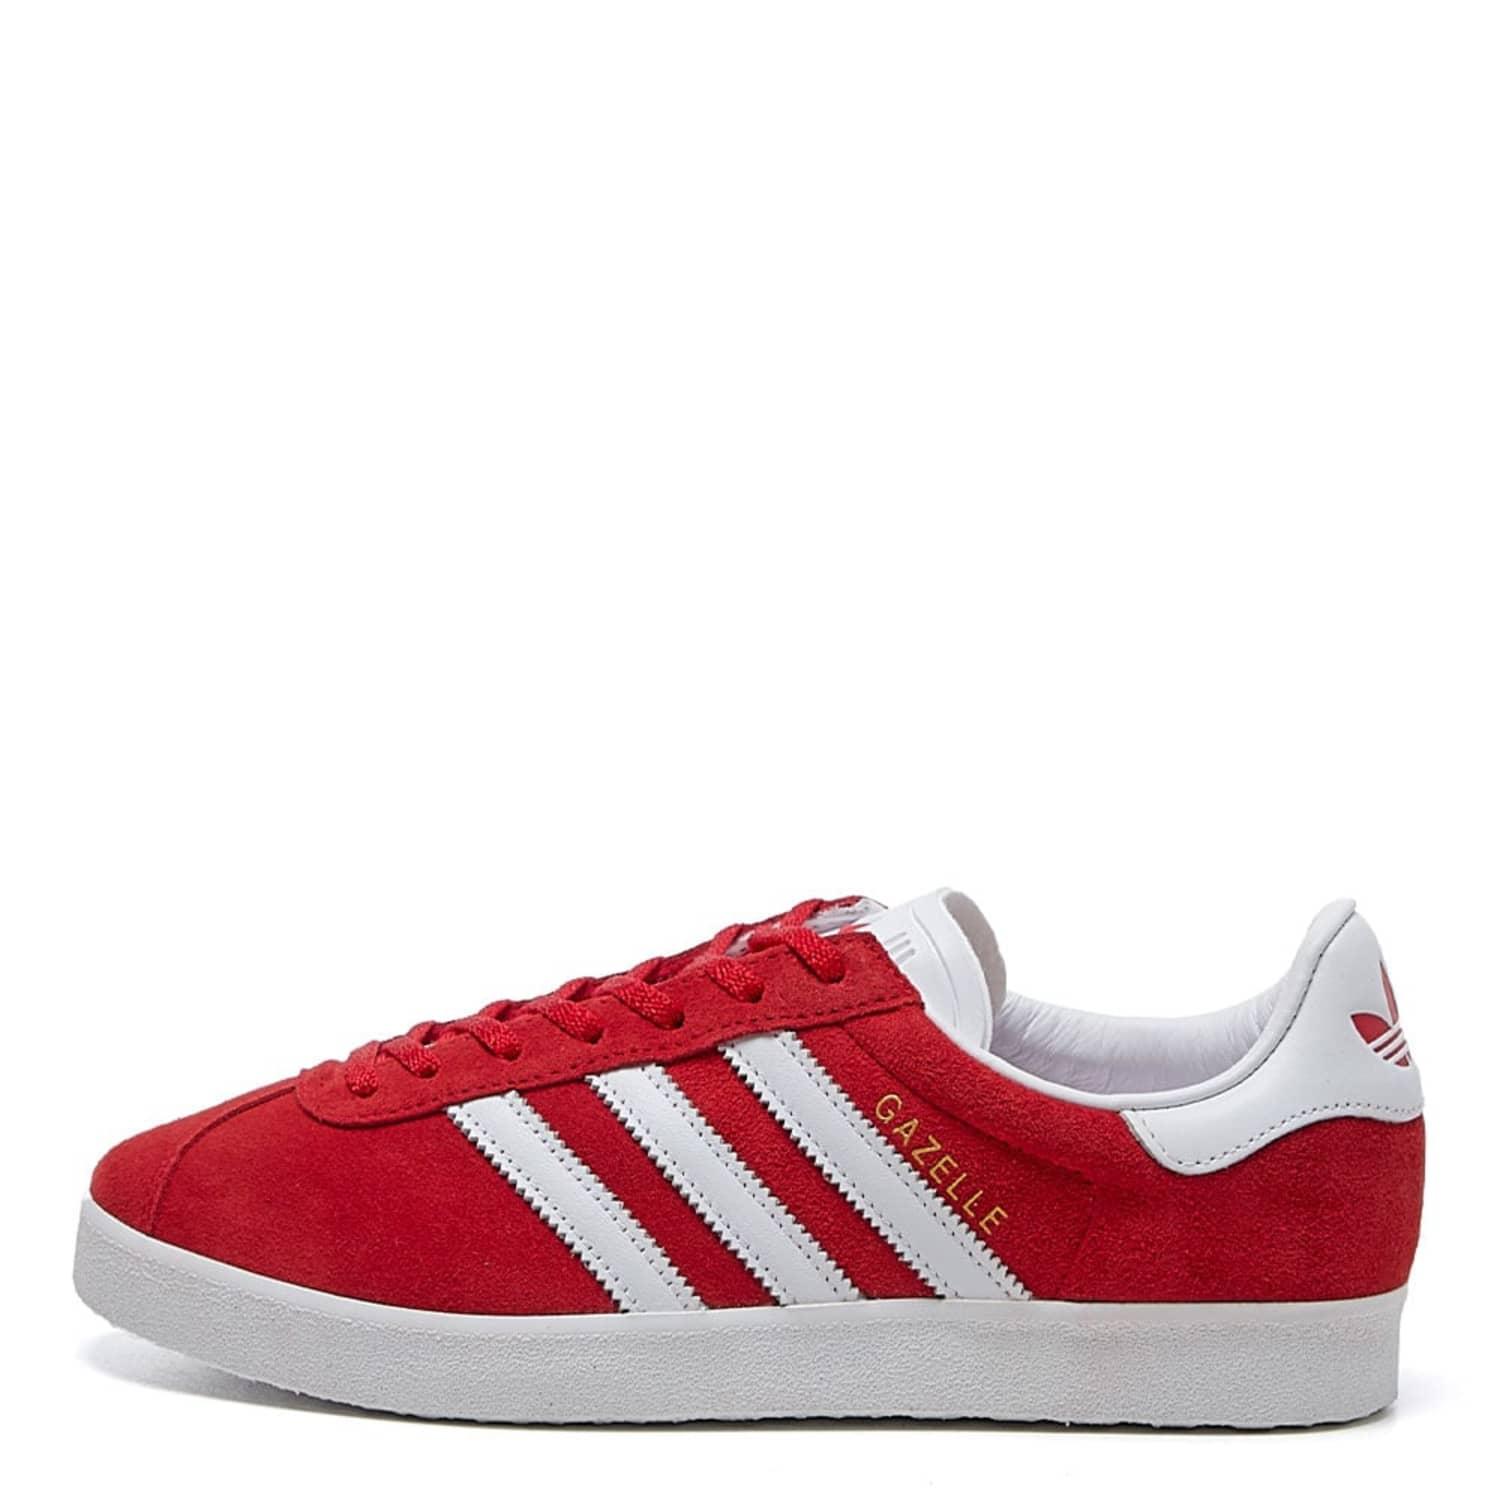 adidas Gazelle 85 Trainers in Red | Lyst